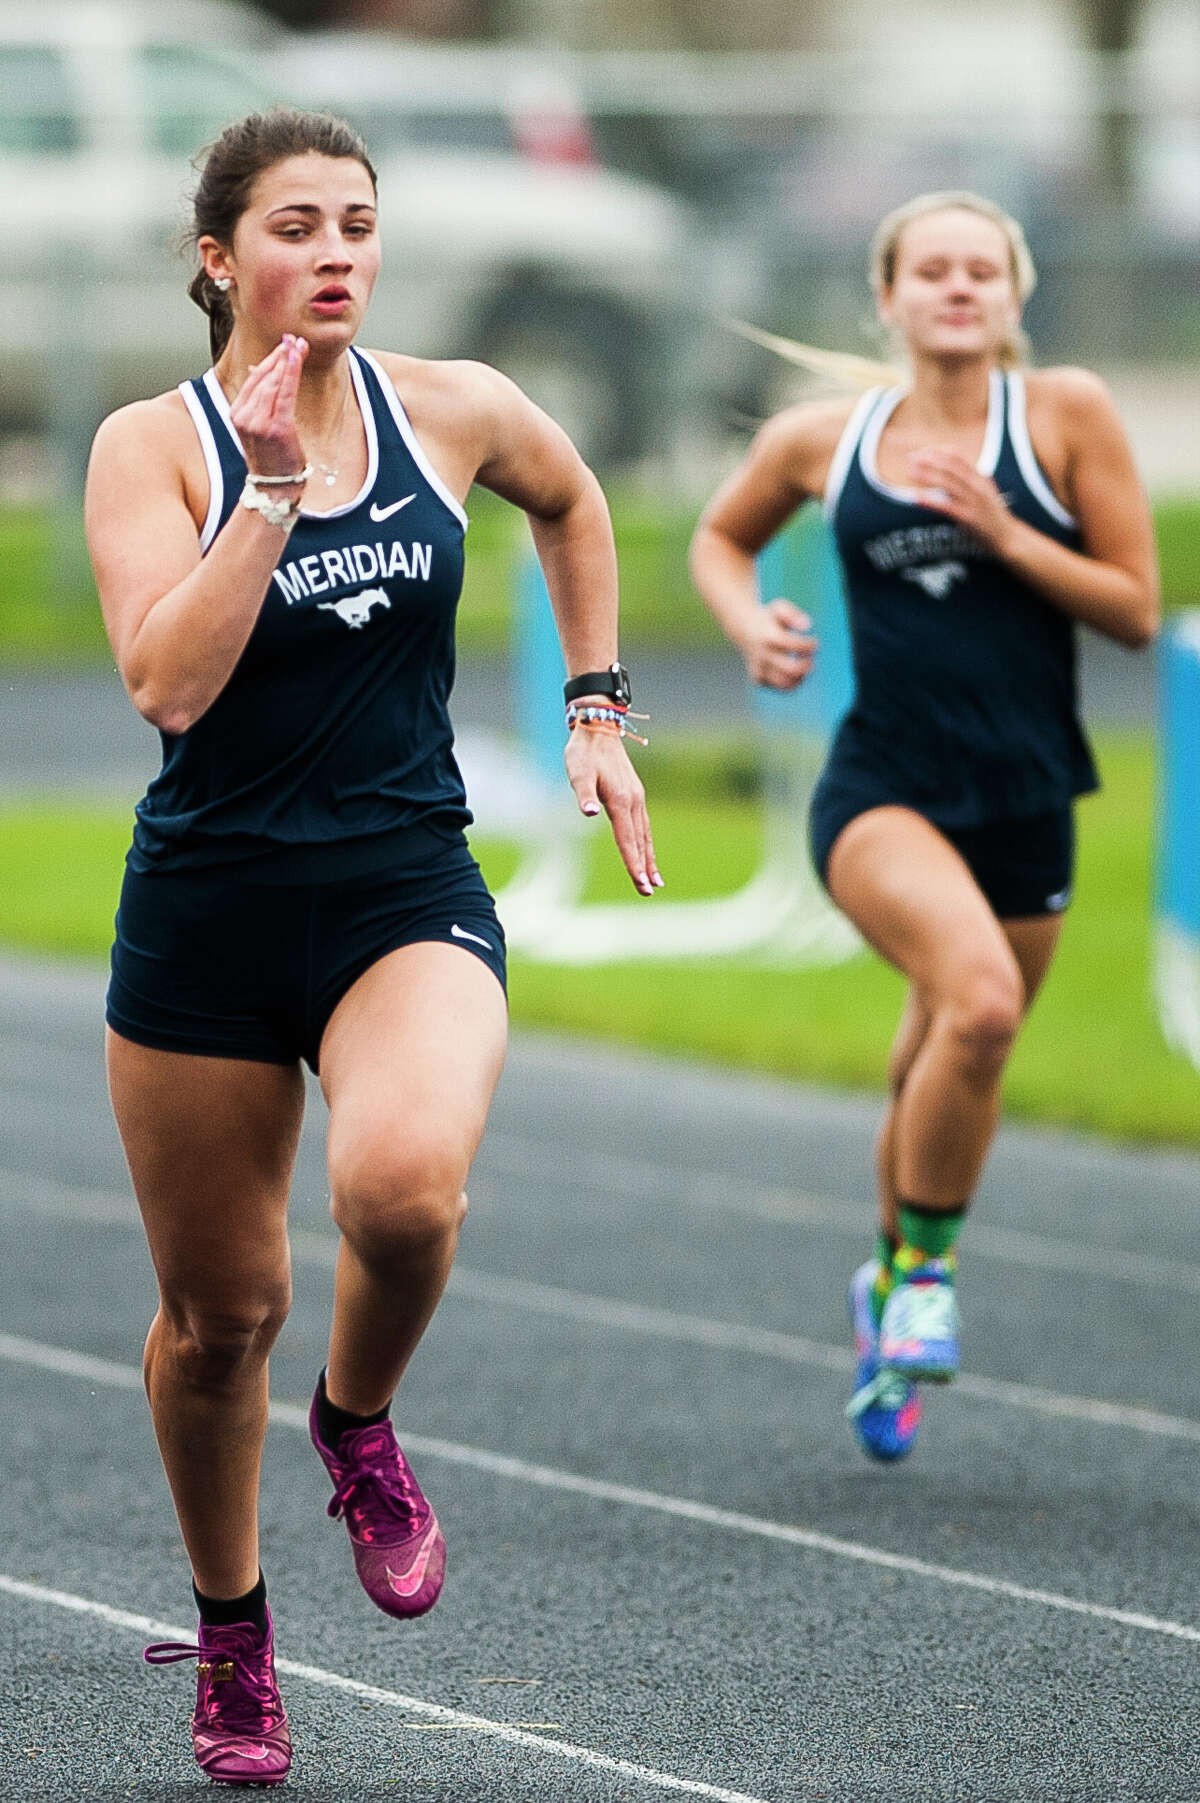 Meridian's Bella Hatfield competes in the 100 meter dash during a meet against Houghton Lake on Monday, May 6, 2019 at Meridian Early College High School. (Katy Kildee/kkildee@mdn.net)